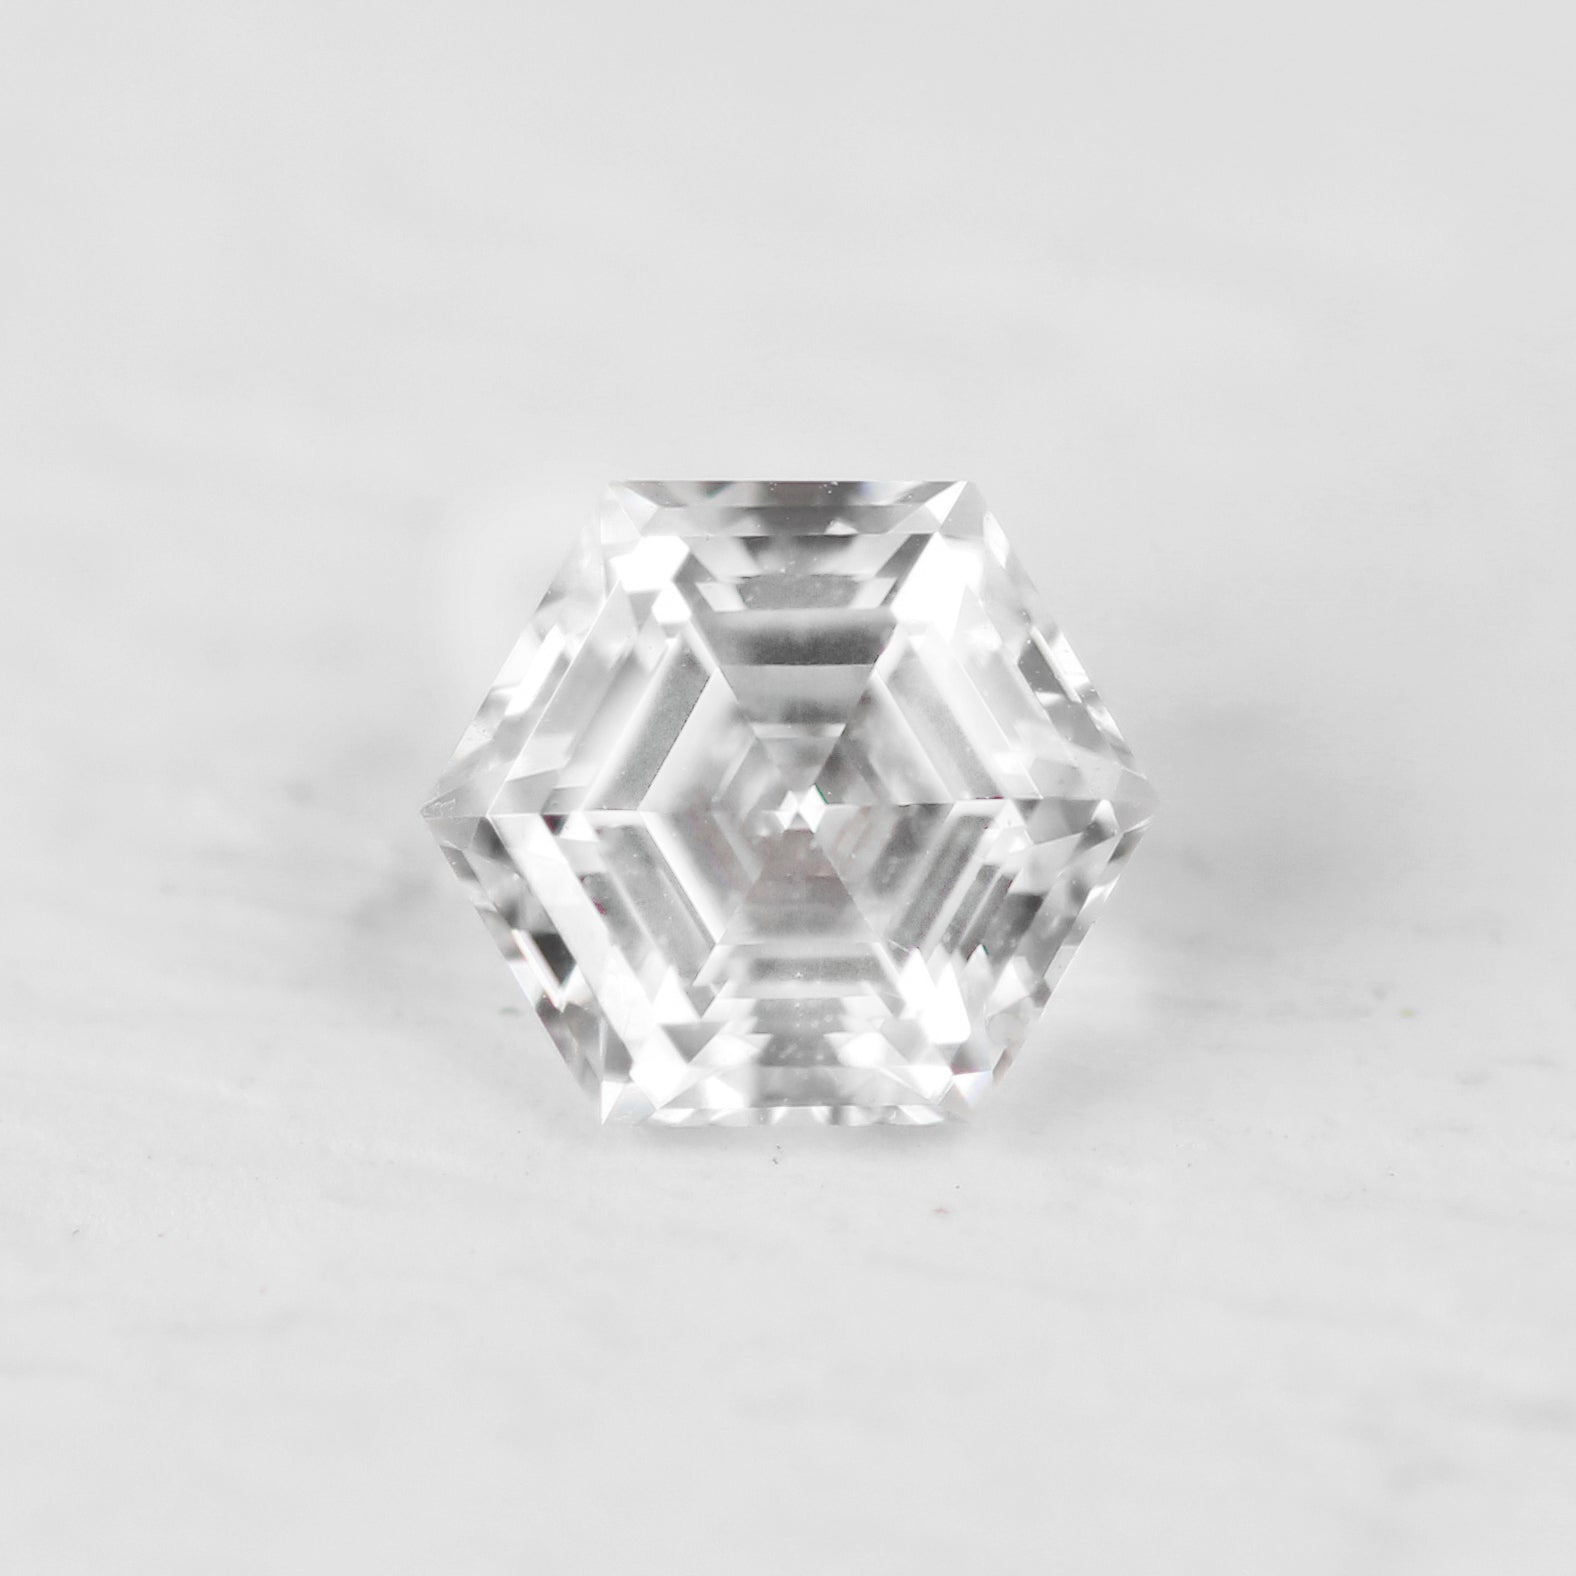 6mm Clear Hexagon Moissanite - Inventory Code MHEX1 - Midwinter Co. Alternative Bridal Rings and Modern Fine Jewelry